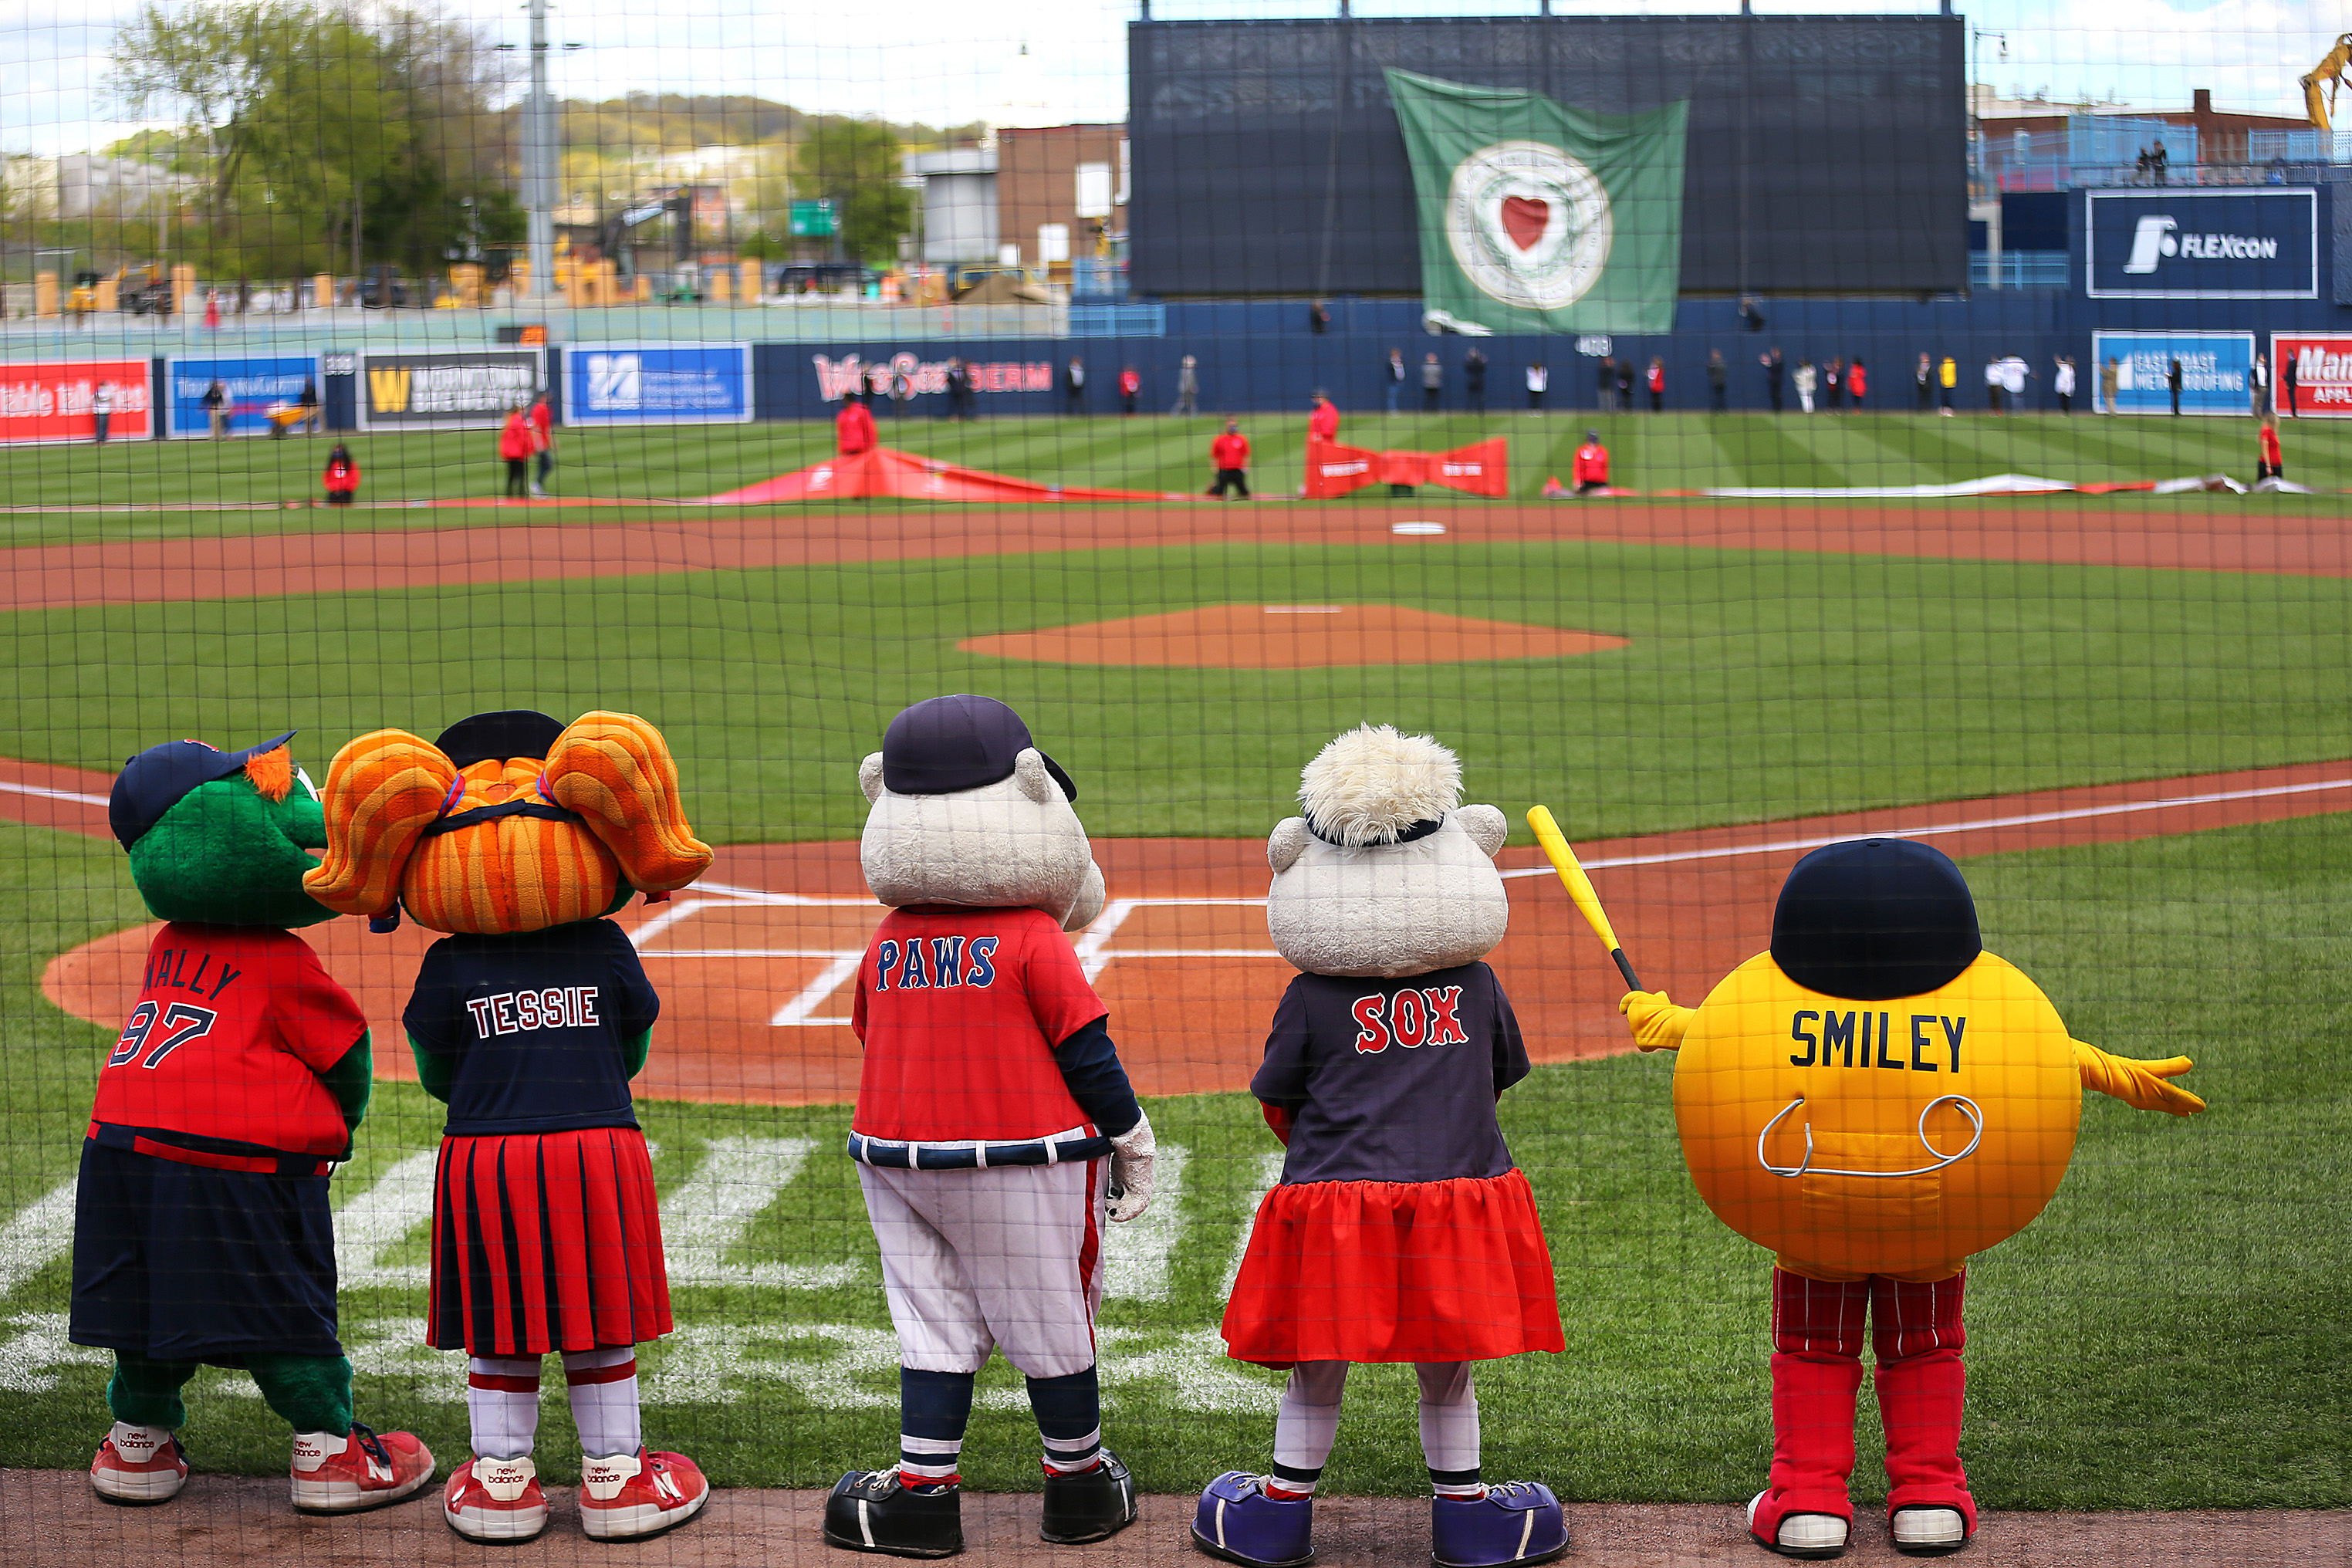 Smile! PawSox to become WooSox in Worcester – SportsLogos.Net News